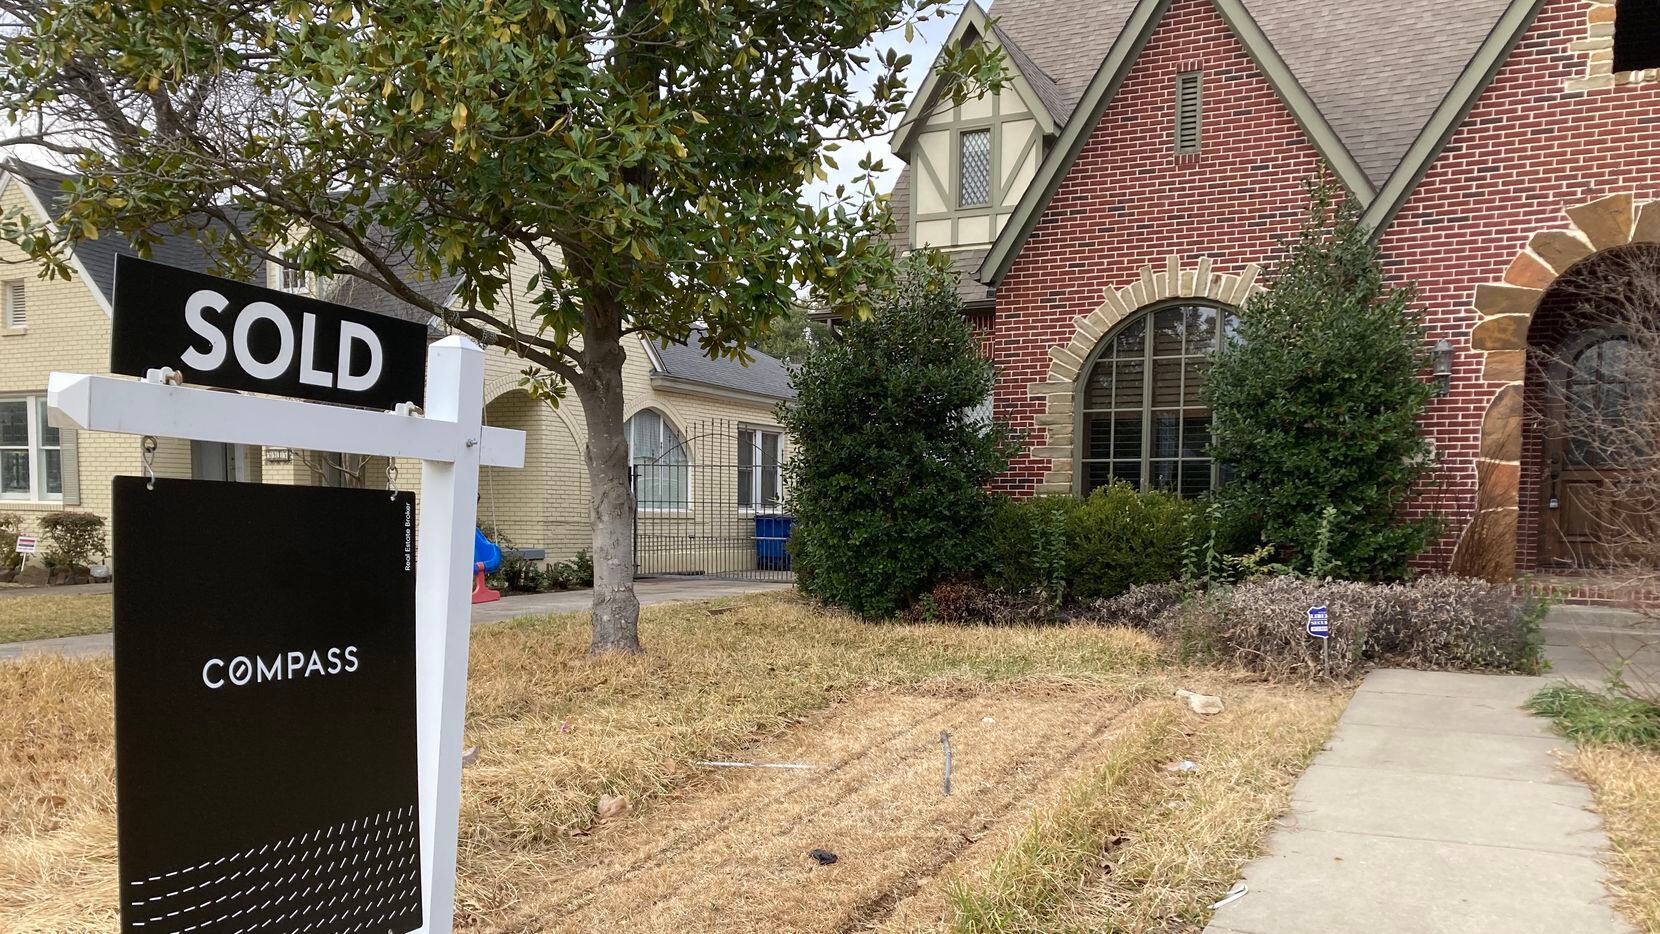 Dallas-area home prices were 26% higher in the latest Case-Shiller survey.